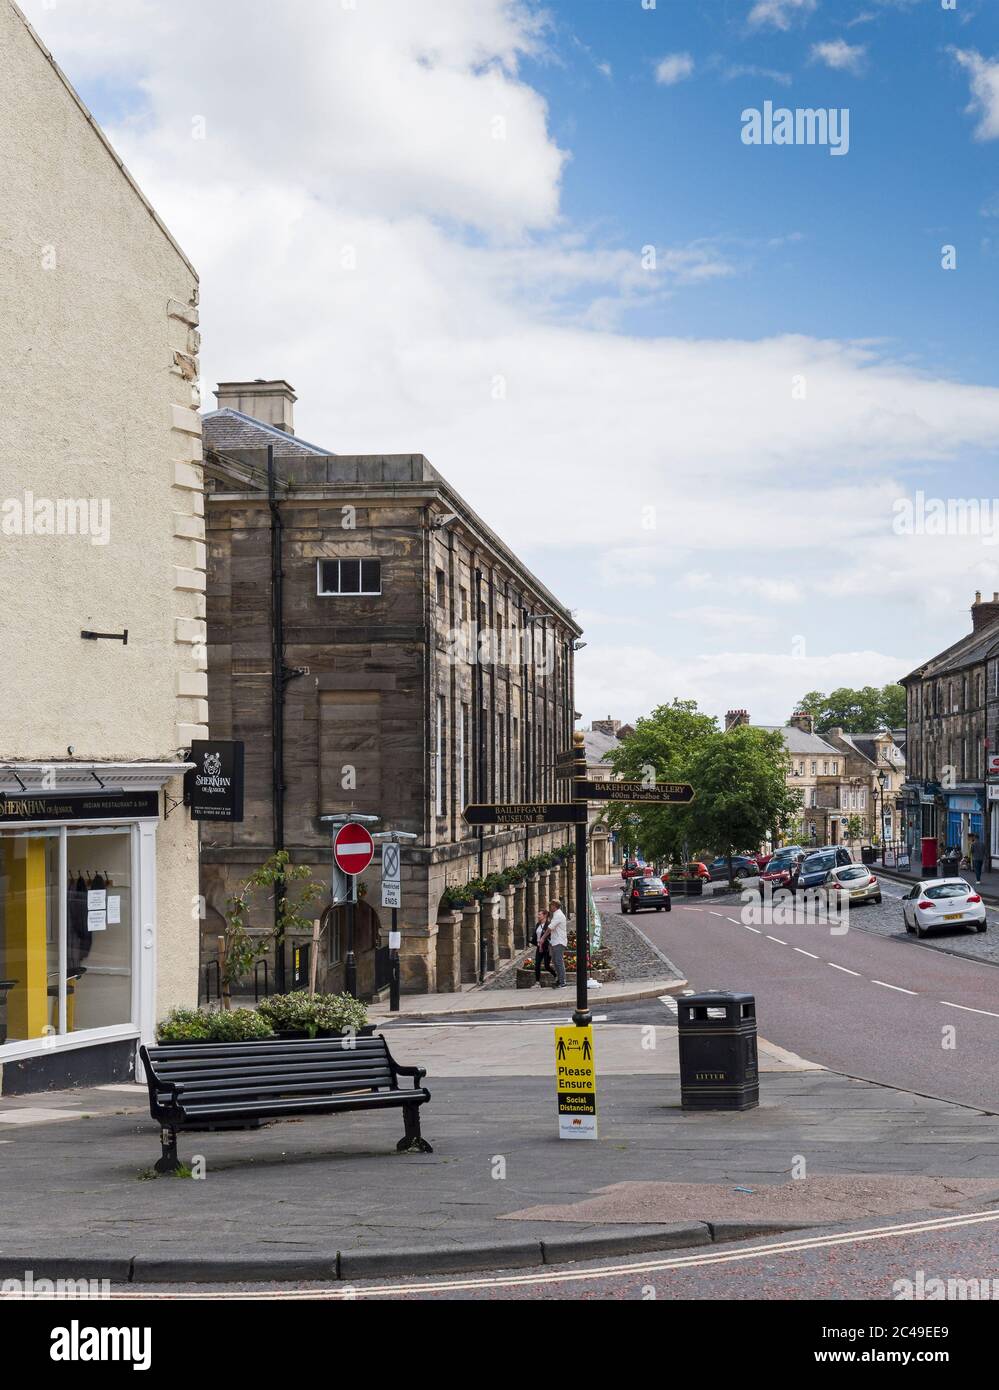 Quiet streets of a usually vibrant market town, Alnwick, Northumberland, Uk and a 2m social distancing sign during the 2020 coronavirus pandemic. Stock Photo